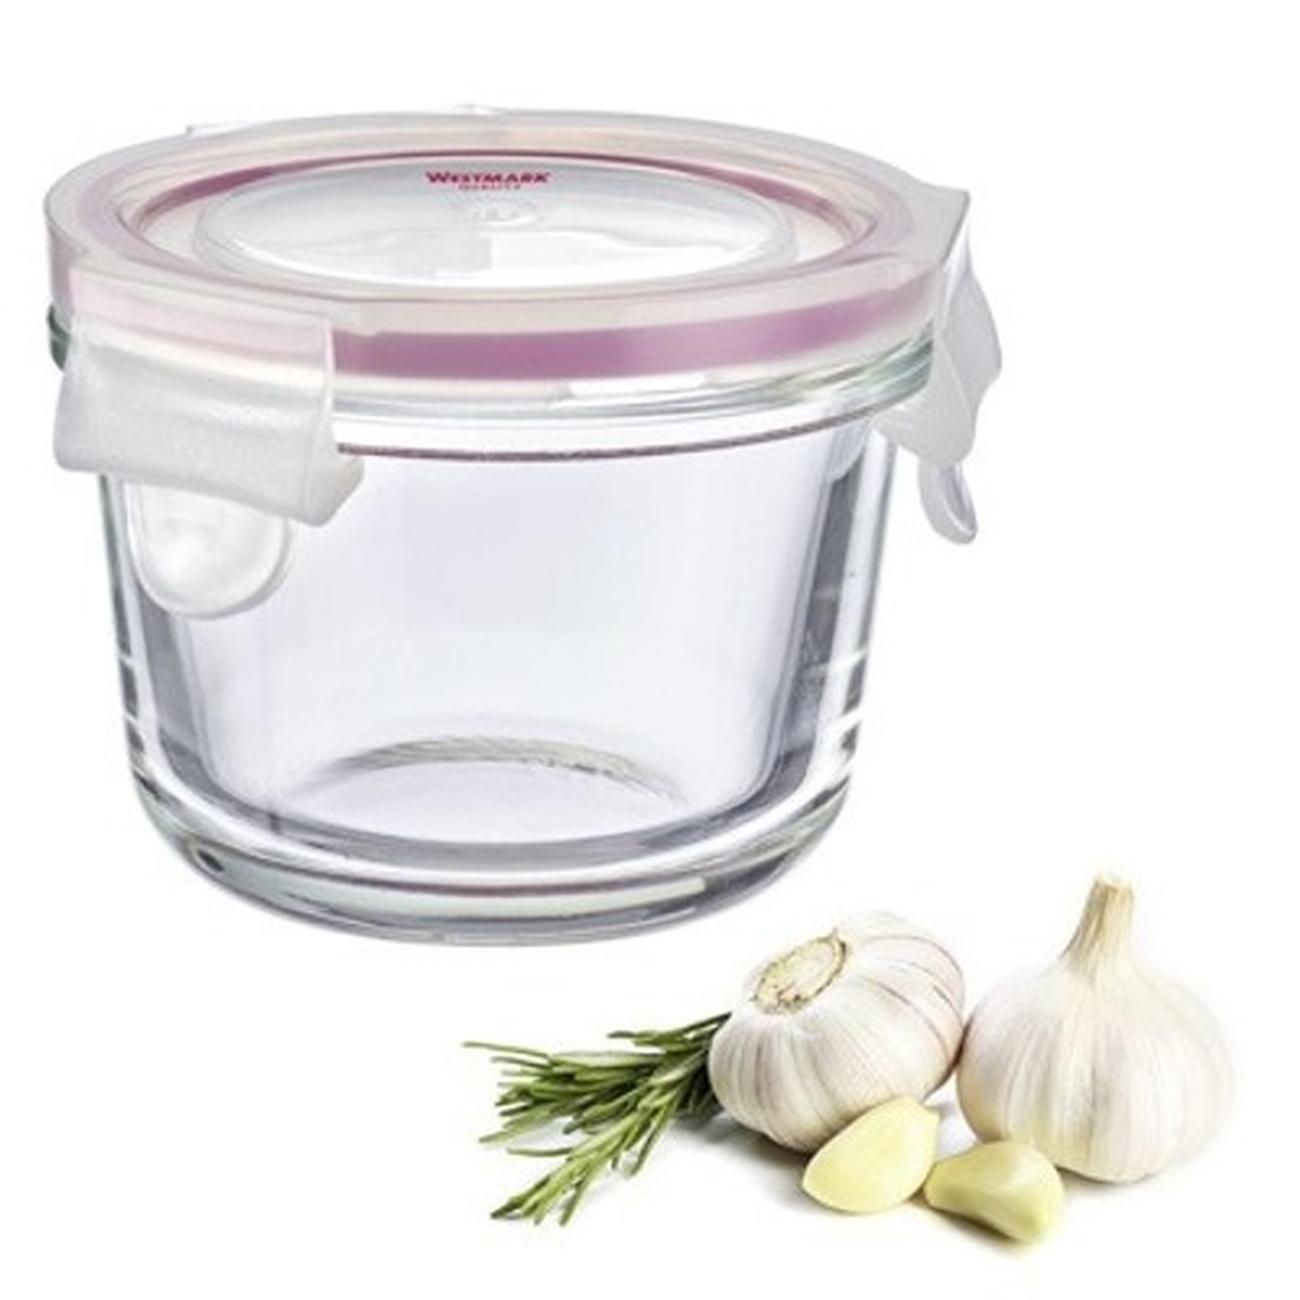 https://www.thekitchenwhisk.ie/contentfiles/productImages/Large/westmark-round-glass-food-storage-box150ml2.jpg